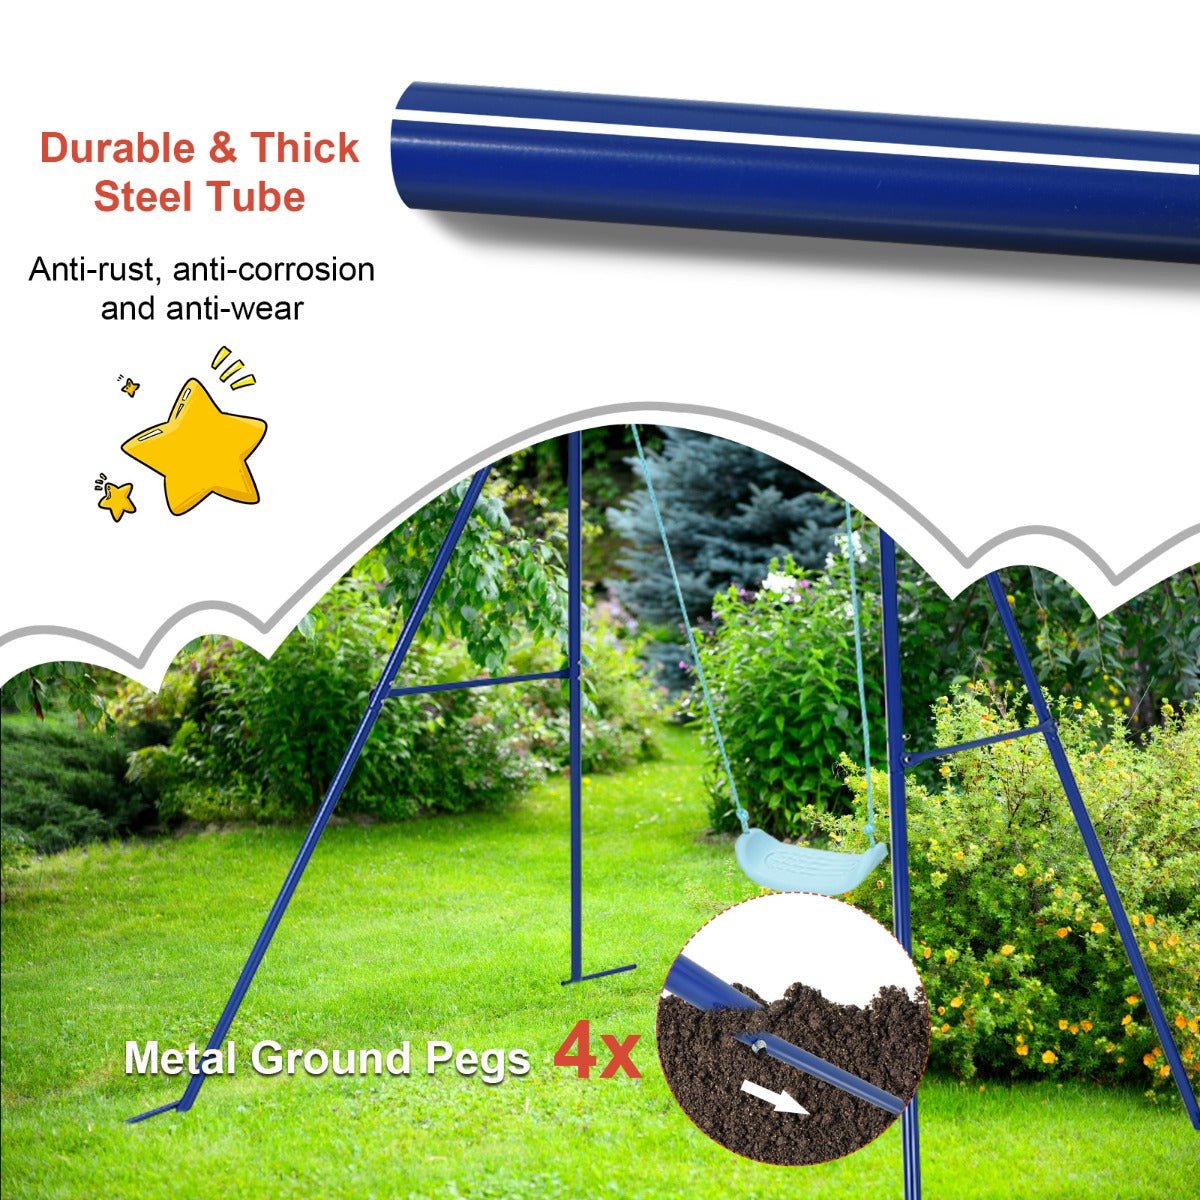 A-Frame Metal Swing Set: Refreshing Blue for Active Outdoor Play